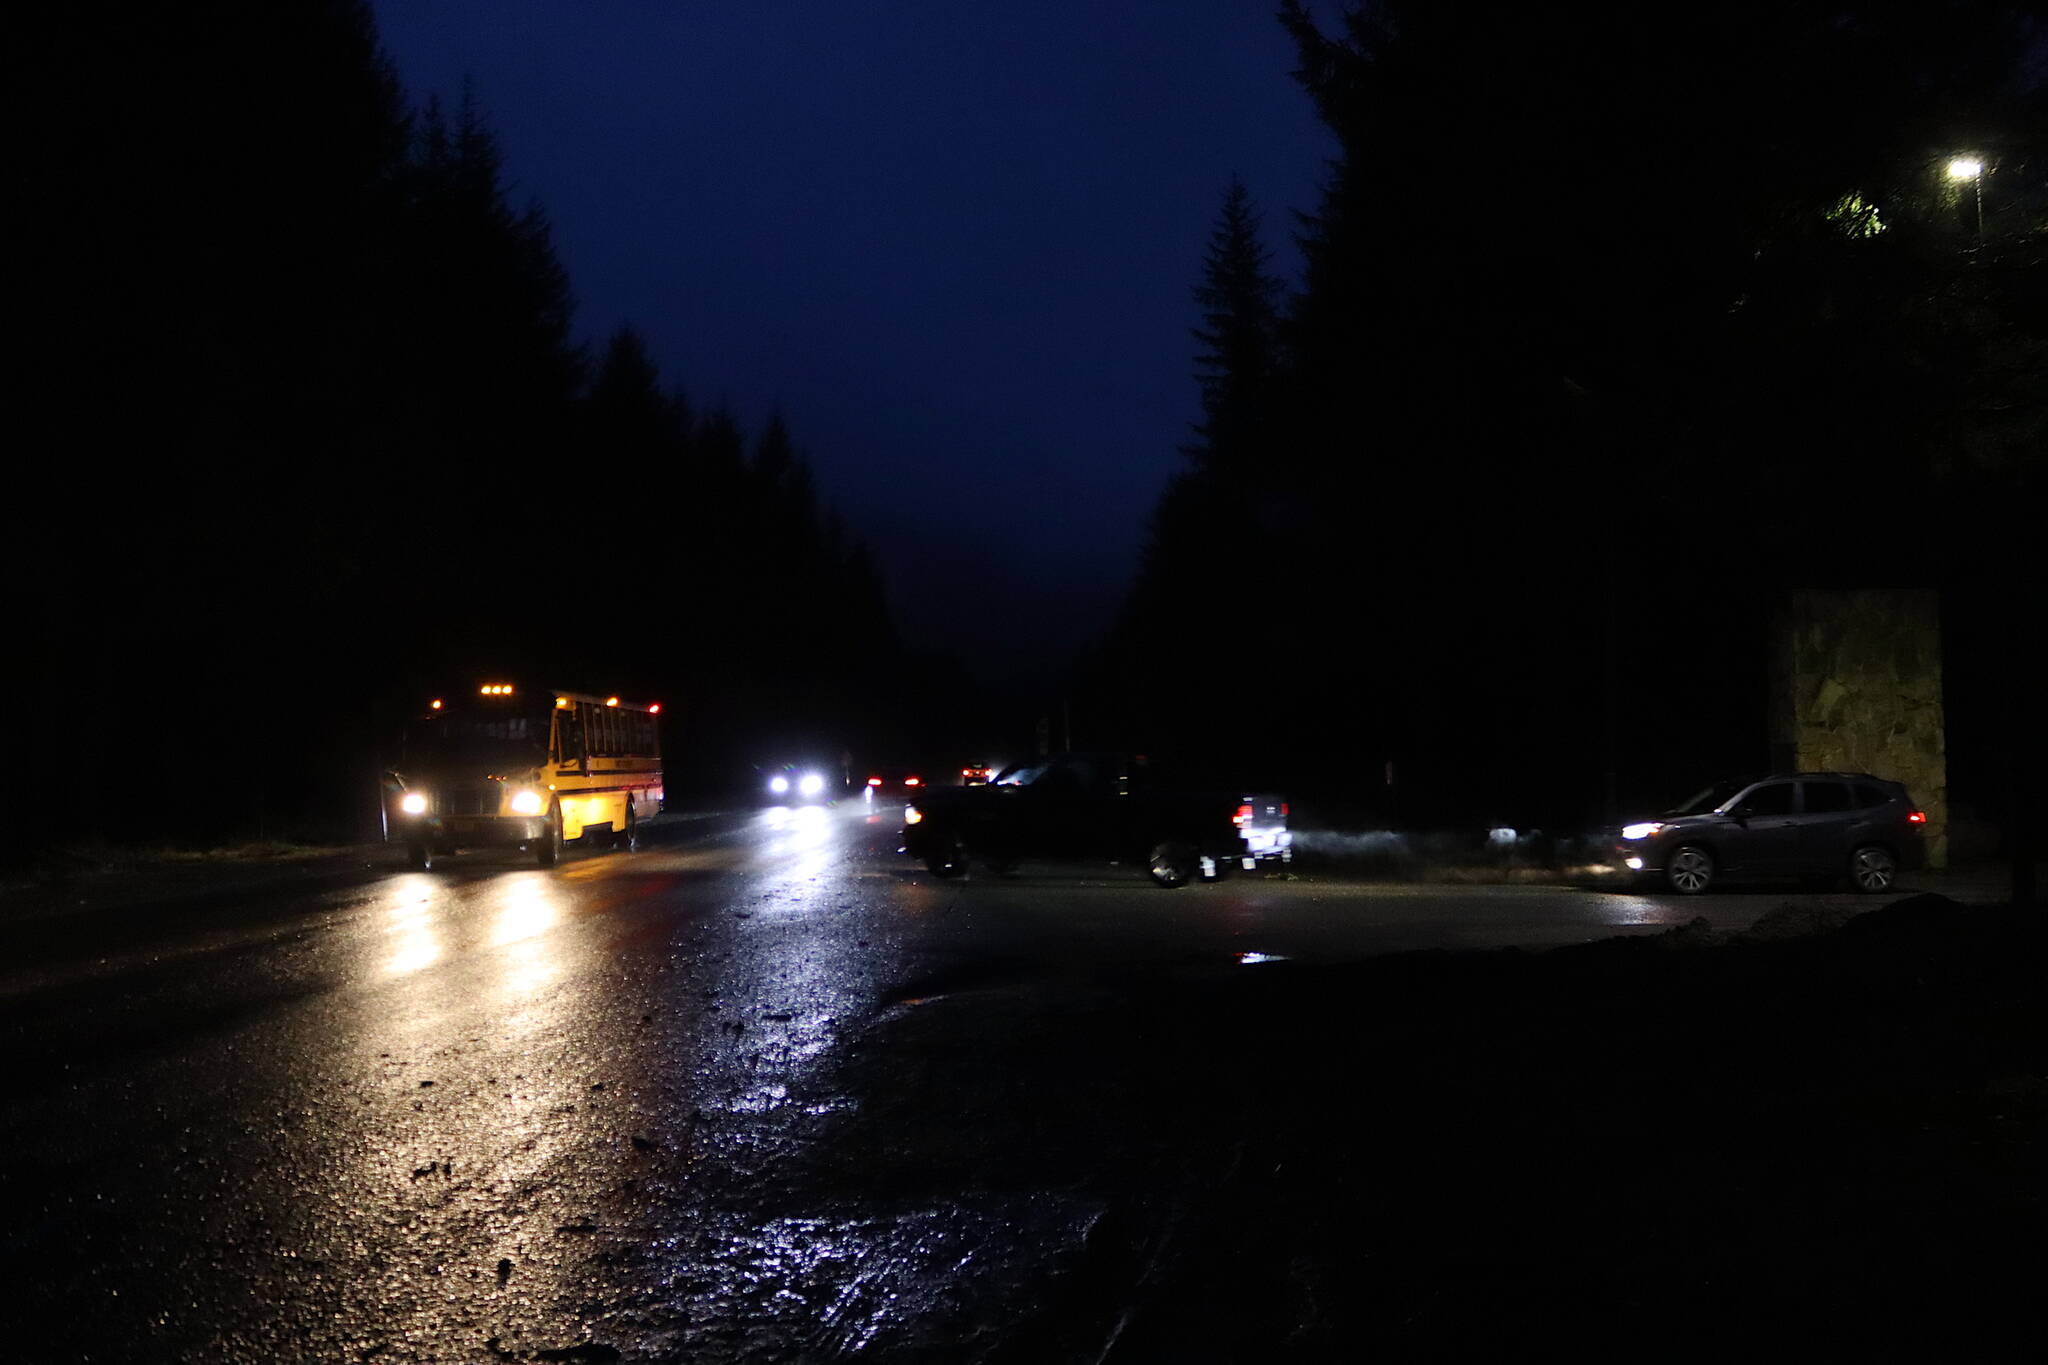 A school bus on Back Loop Road prepares to turn into the entrance to Mendenhall River Community School shortly before classes start on Wednesday morning. Juneau School District Superintendent Frank Hauser on Tuesday said he is asking state transportation officials to consider street lights and/or other safety improvements on the road following a collision last Thursday between a vehicle and three people walking to the school. (Mark Sabbatini / Juneau Empire)